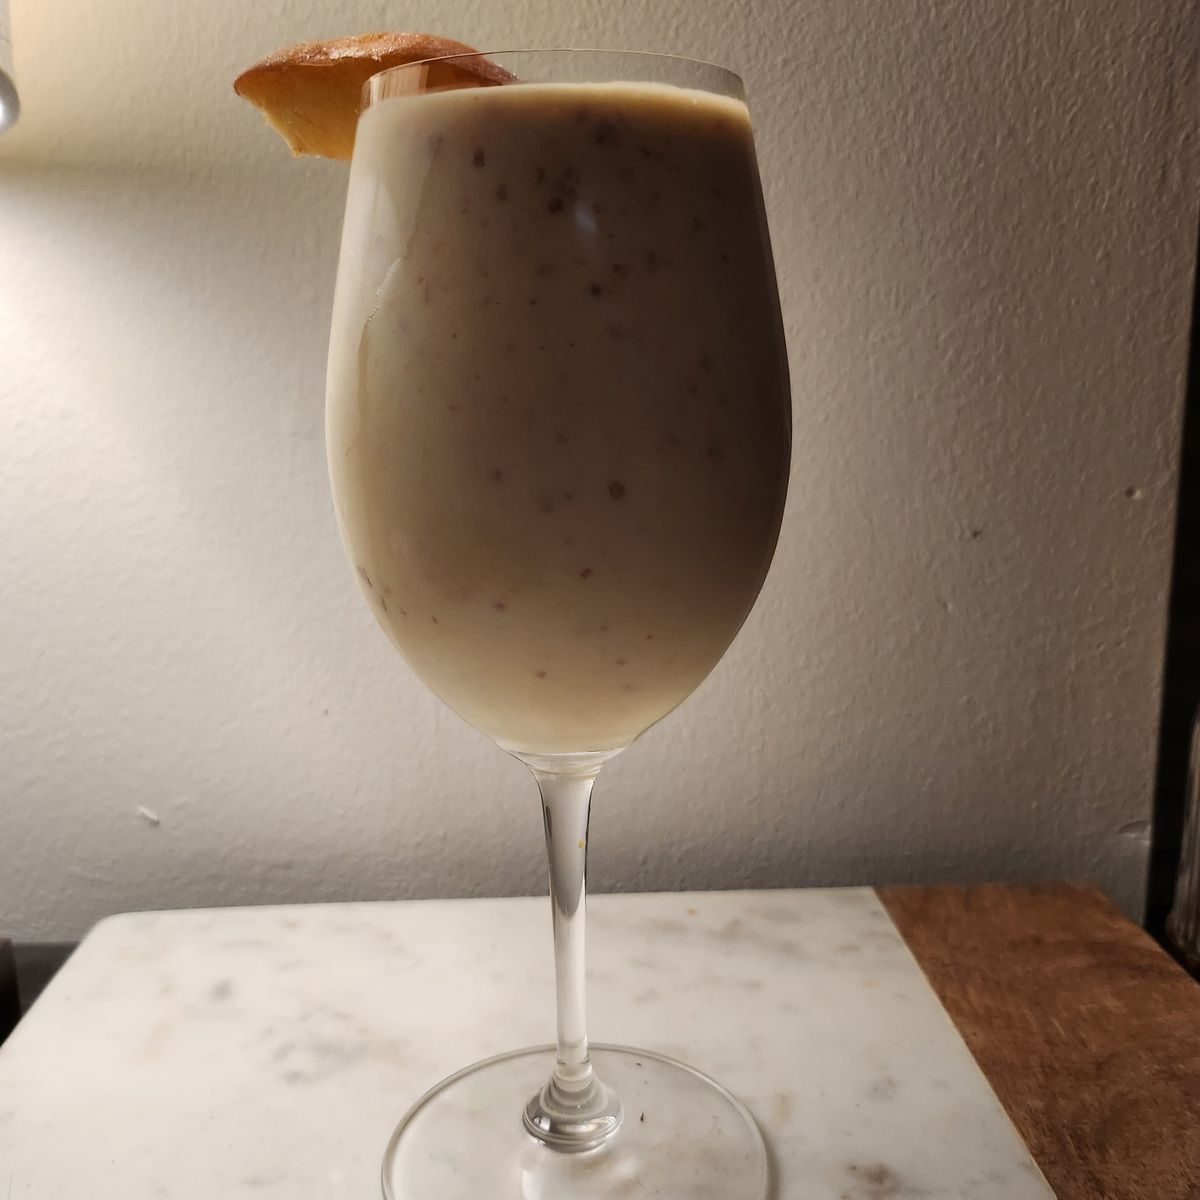 Hello friends! I'm back again with another frozen peach cocktail! This time I have rum and coconut cream for a version of a colada with peach in it. This time, the coconut cream gives the drink a wonderful body and the fresh peach lends a delicate flavor. This is a great summertime drink, and with the weather still being quite warm, this was a perfect little sipper. All in all, this was a great drink! Cheers!